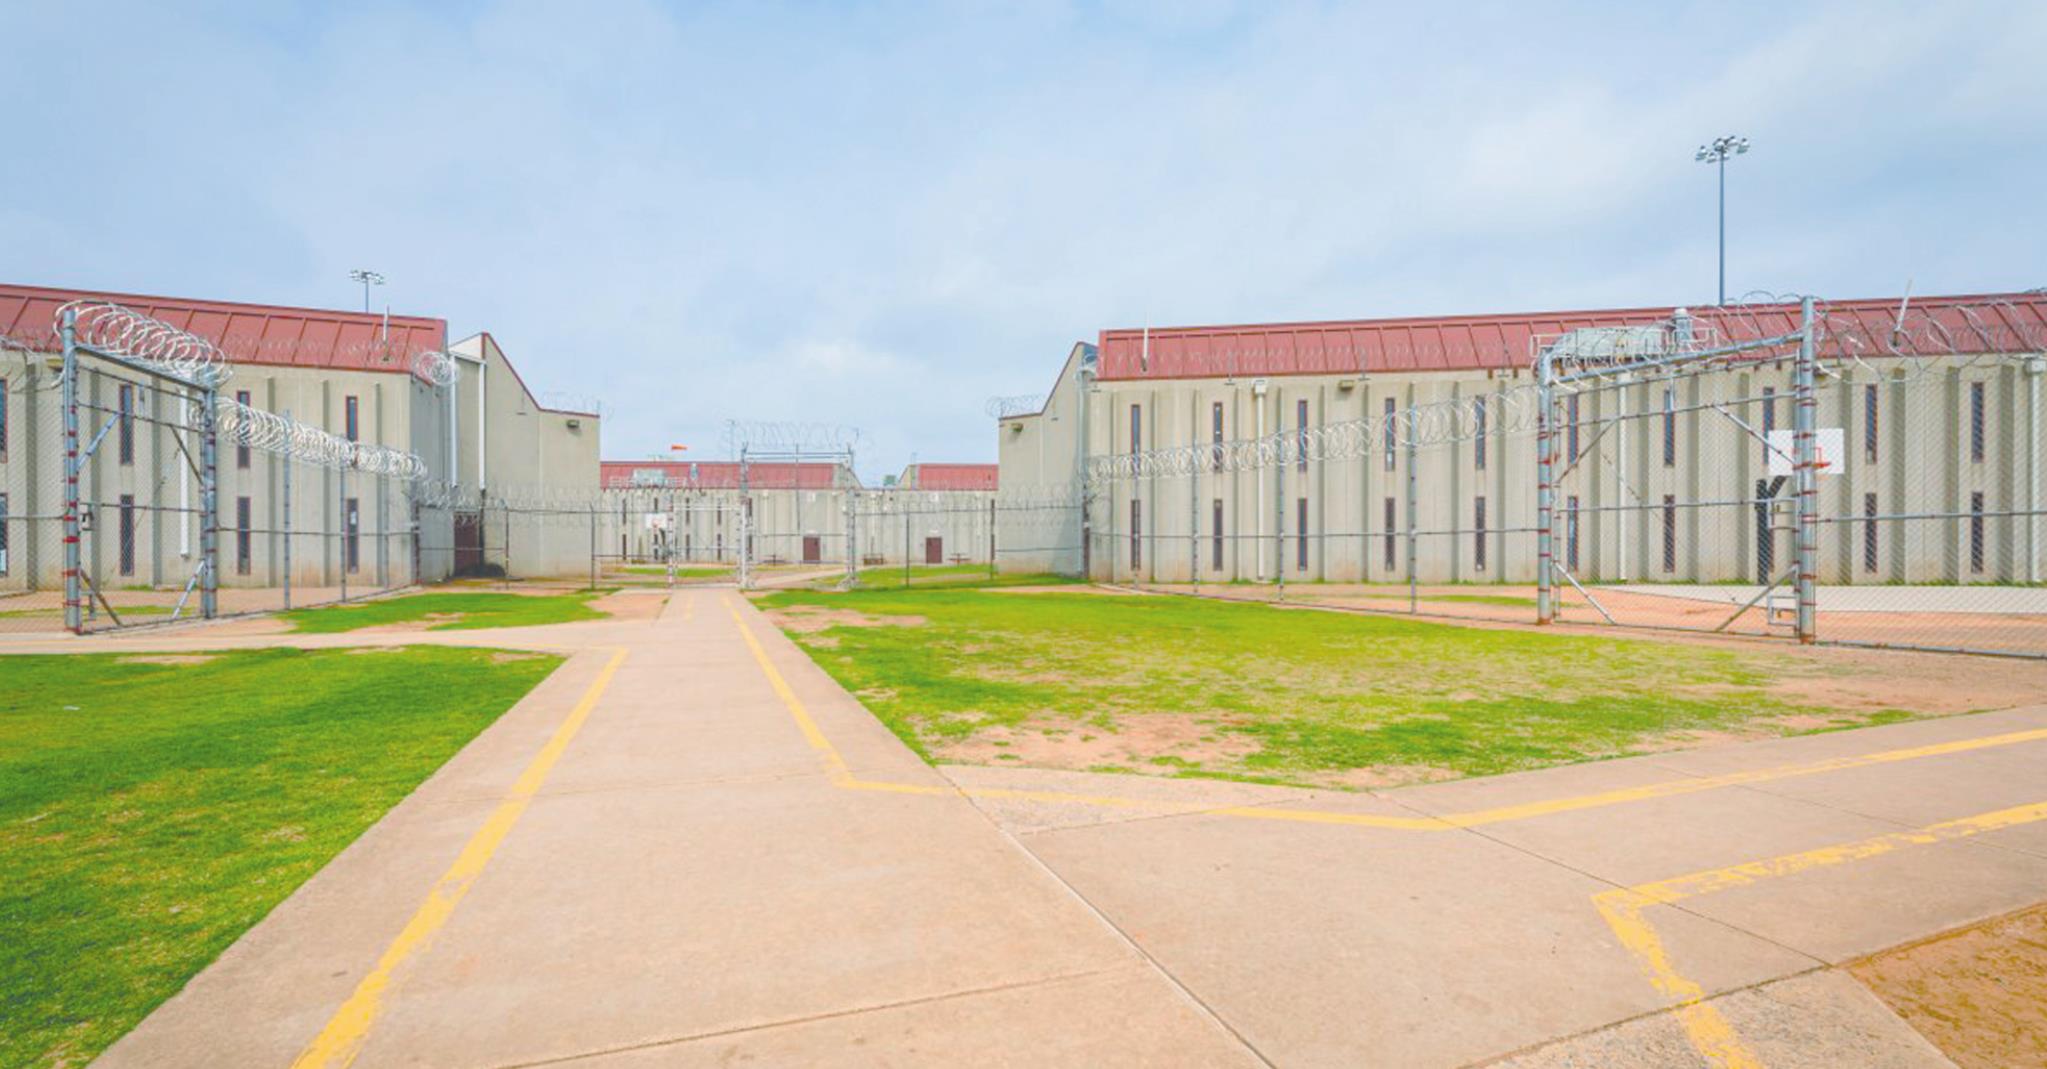 The Oklahoma Board of Corrections unanimously approved two contracts which will keep the North Fork Correctional Facility in Sayre — pictured above — and Davis Correctional Facility in Holdenville open through July 2023. Provided